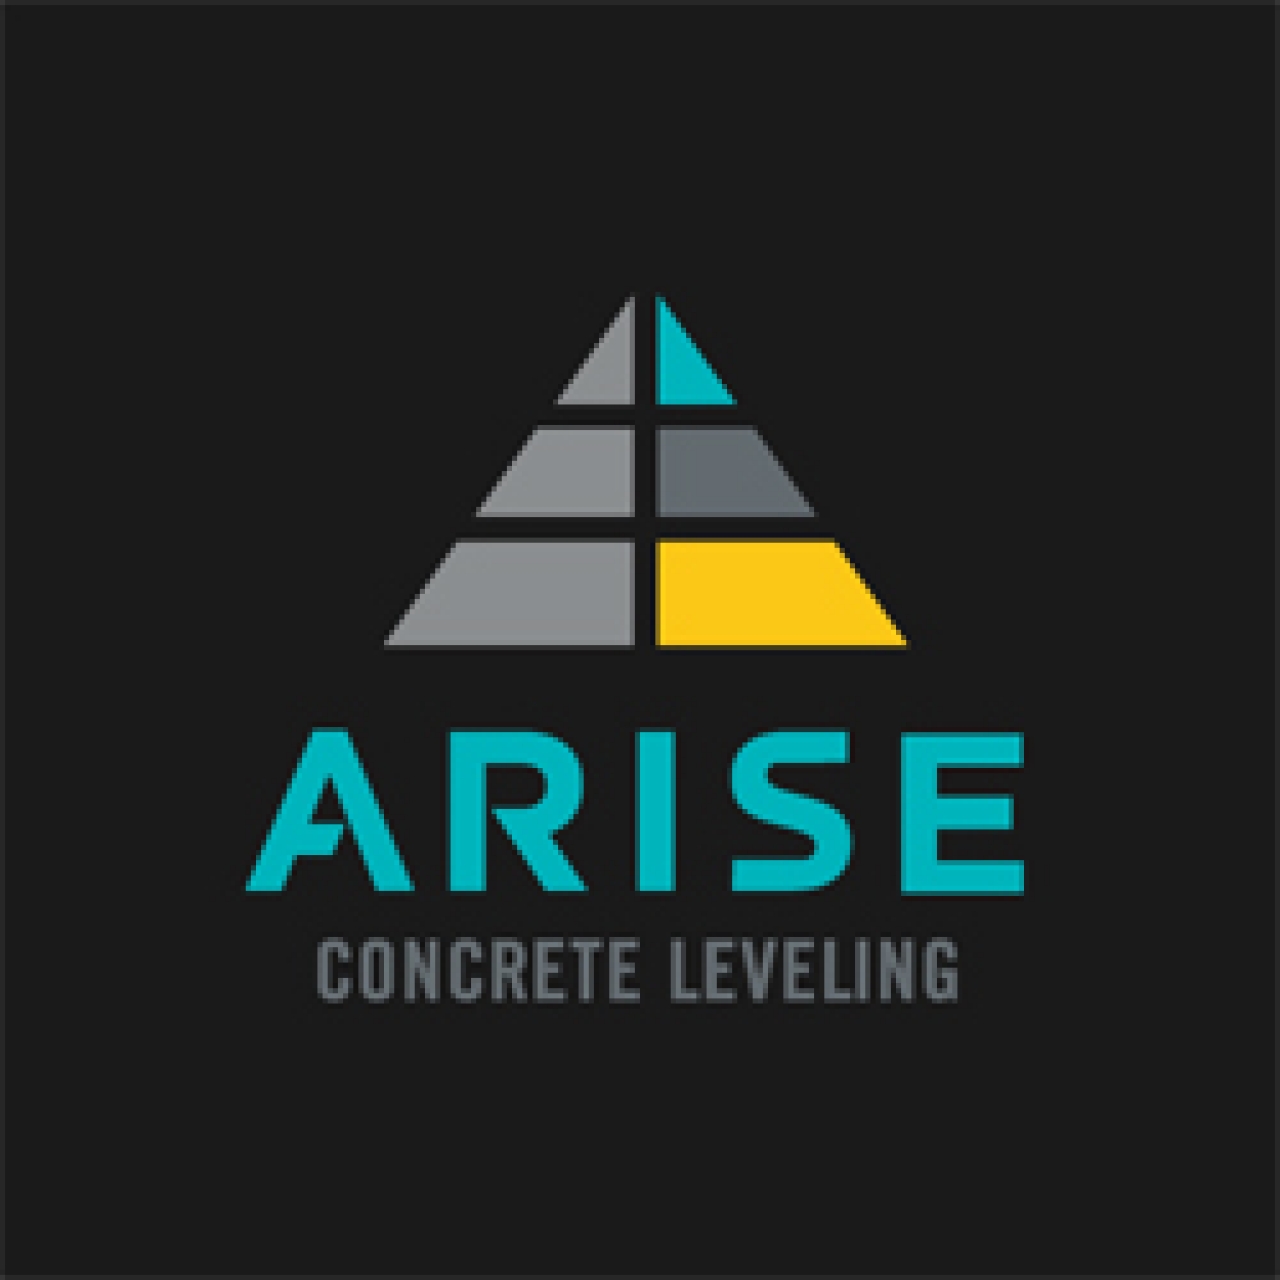 Arise Concrete Leveling logo design is a sidewalk in perspective perfectly leveled